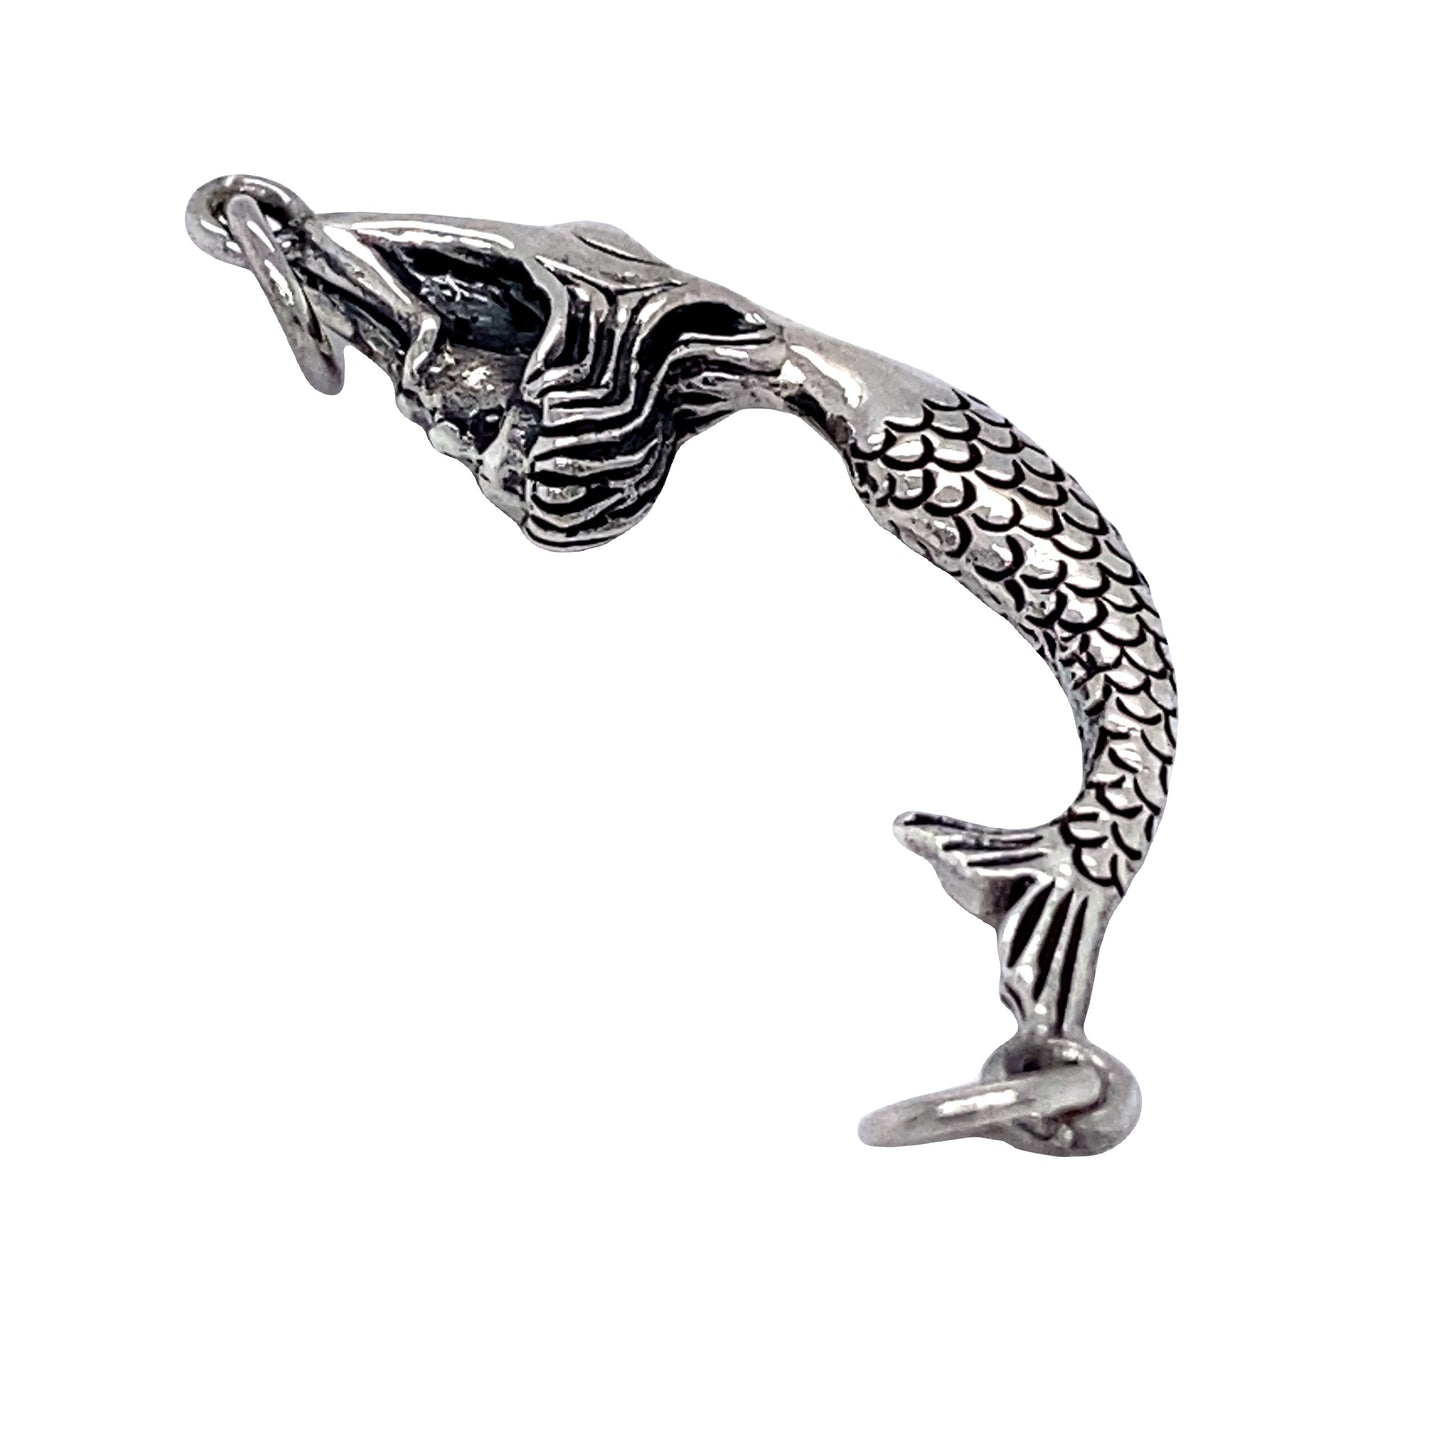 A Lounging Mermaid Pendant by Super Silver on a white background, embodying the sea goddess.